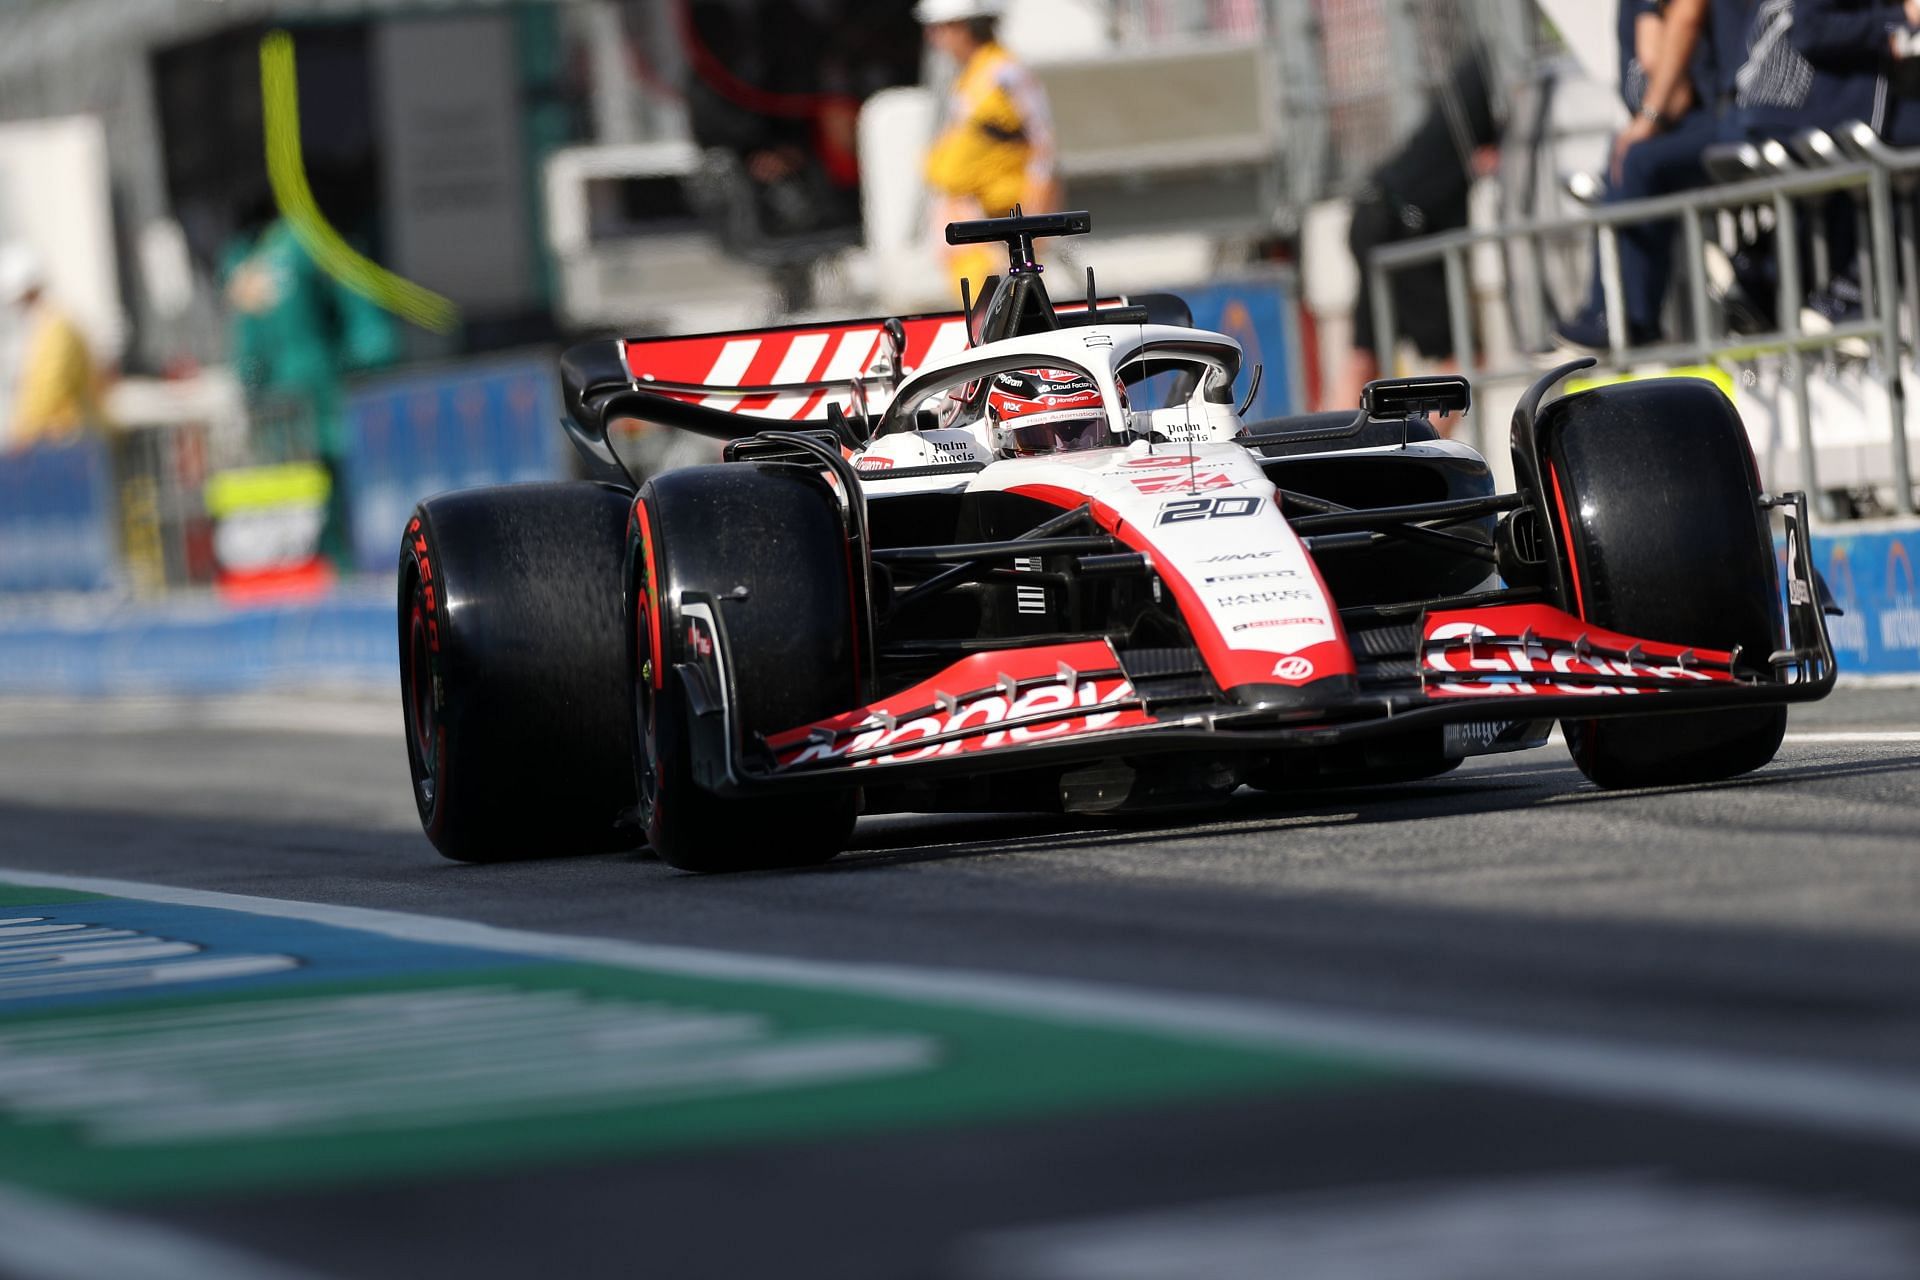 2023 F1 Spanish GP: Haas team principal Guenther Steiner summoned by FIA